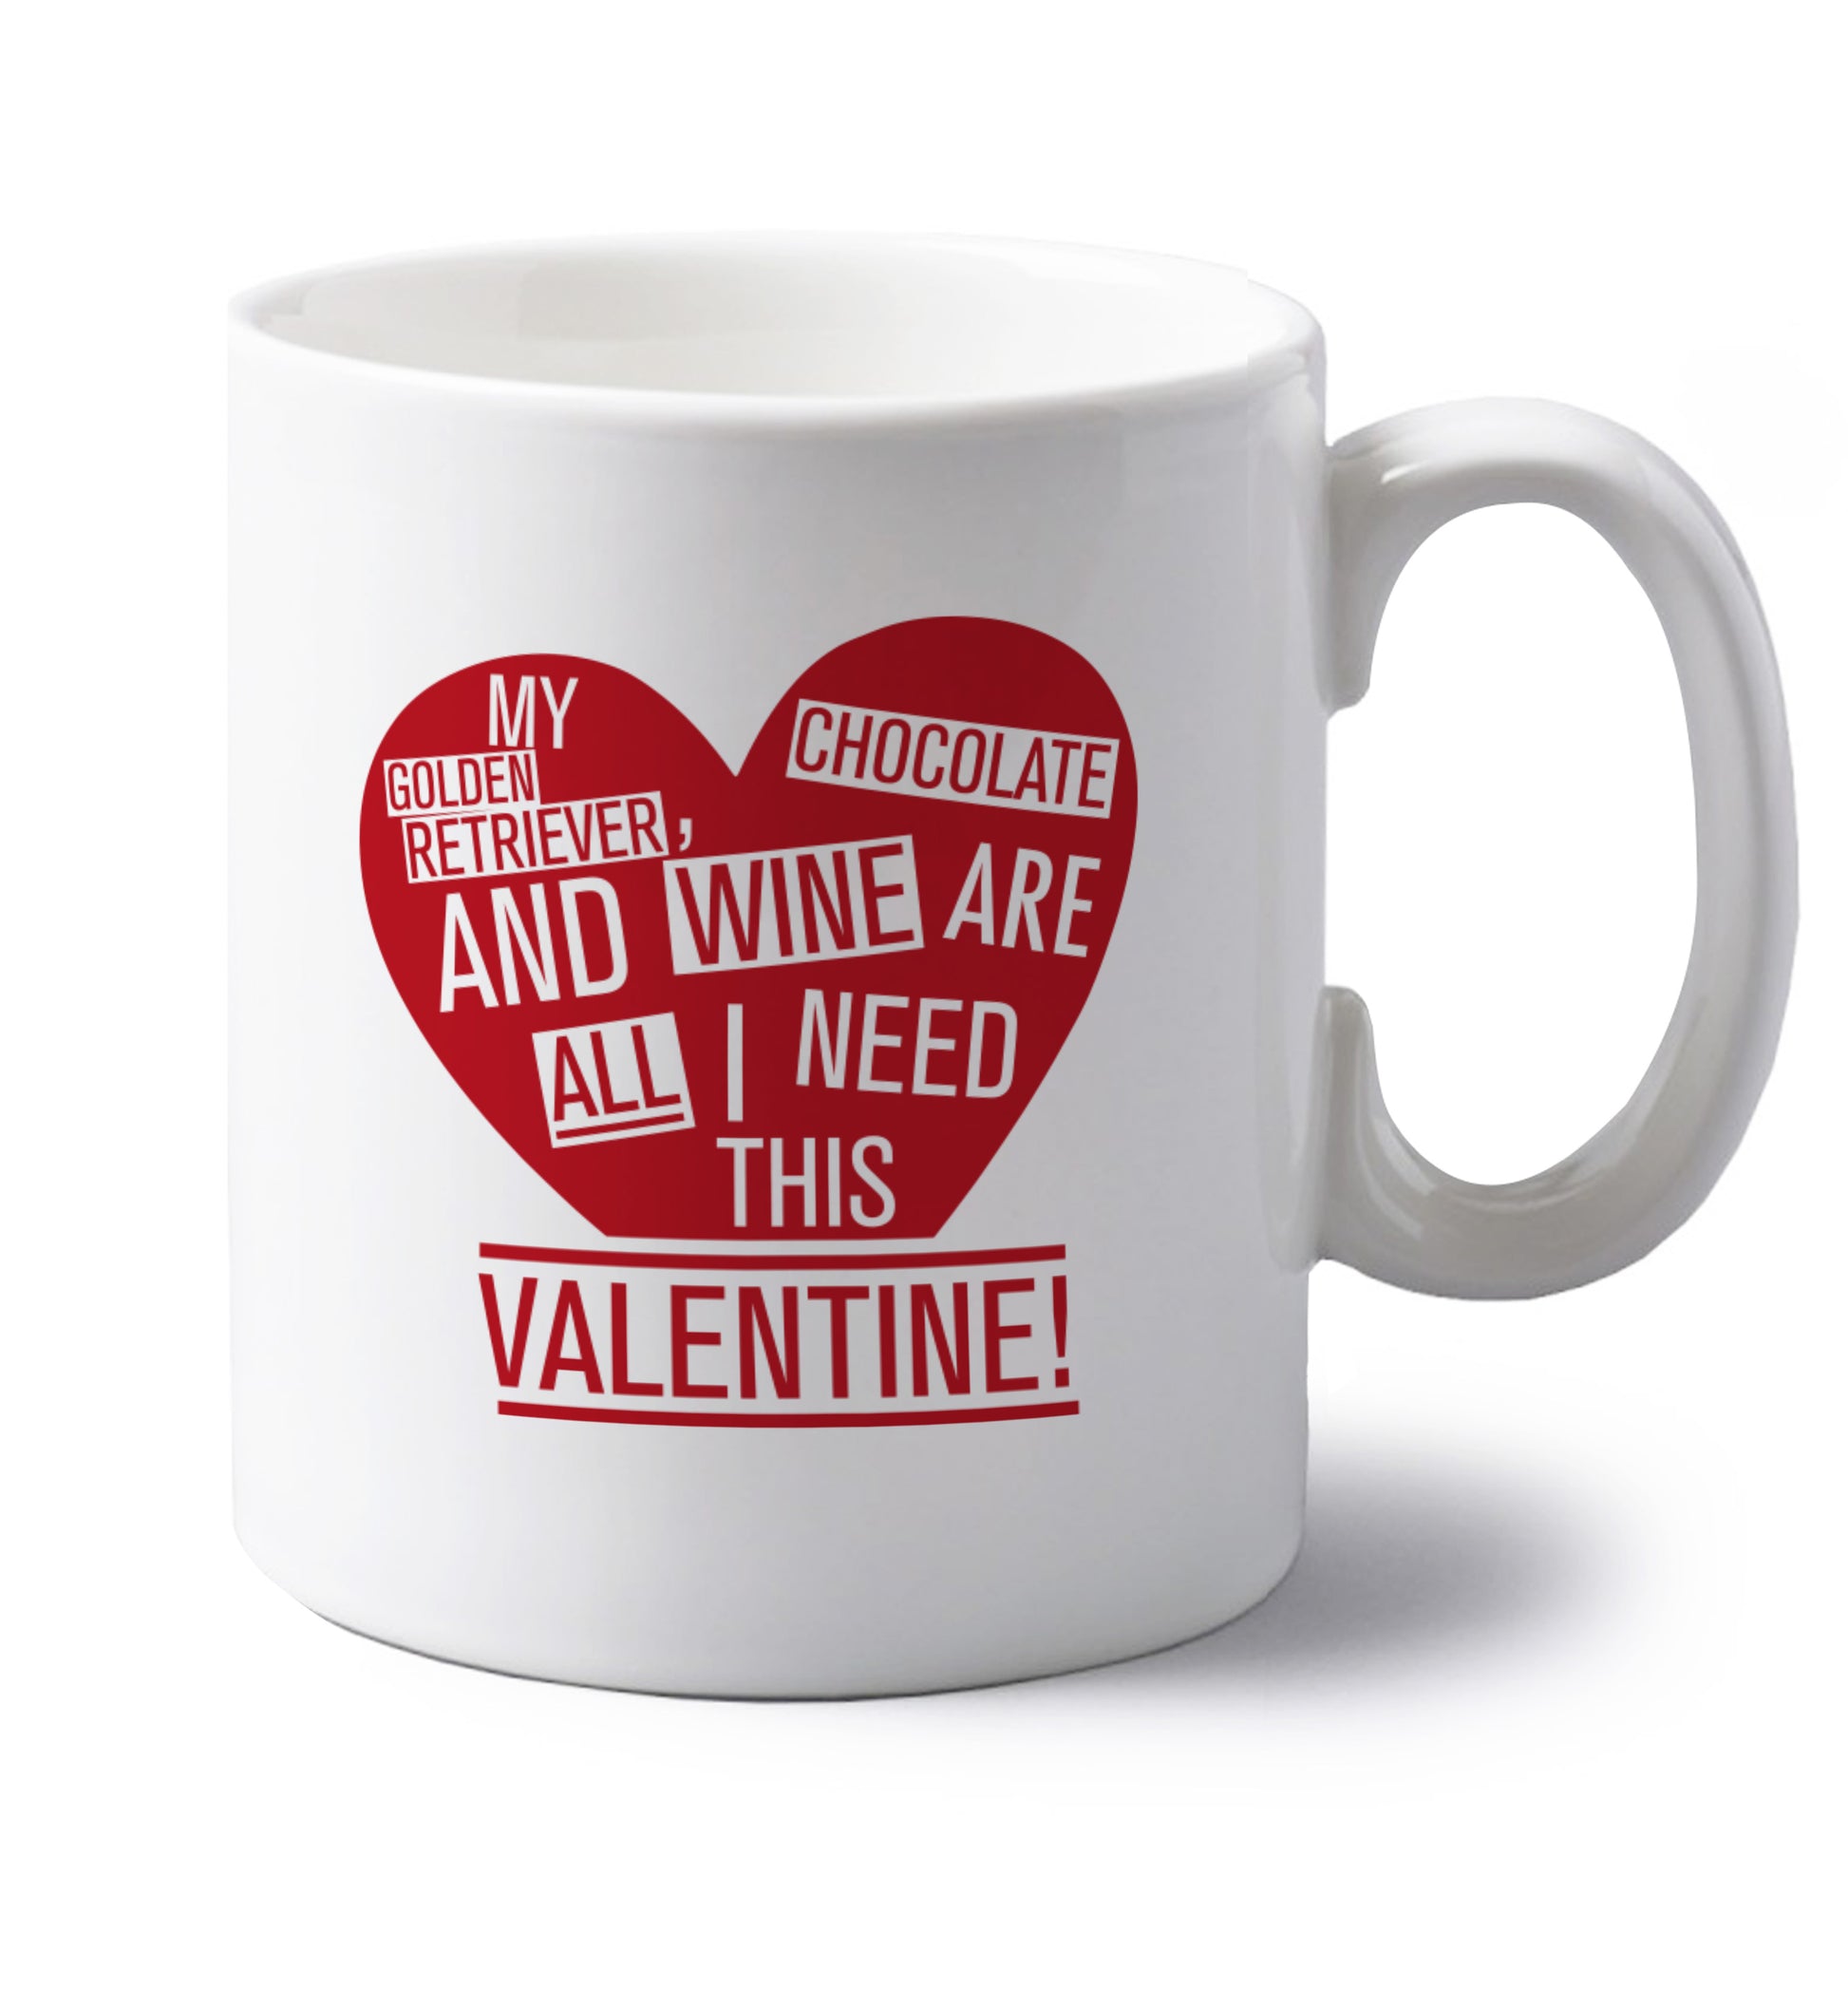 My golden retriever, chocolate and wine are all I need this valentine! left handed white ceramic mug 